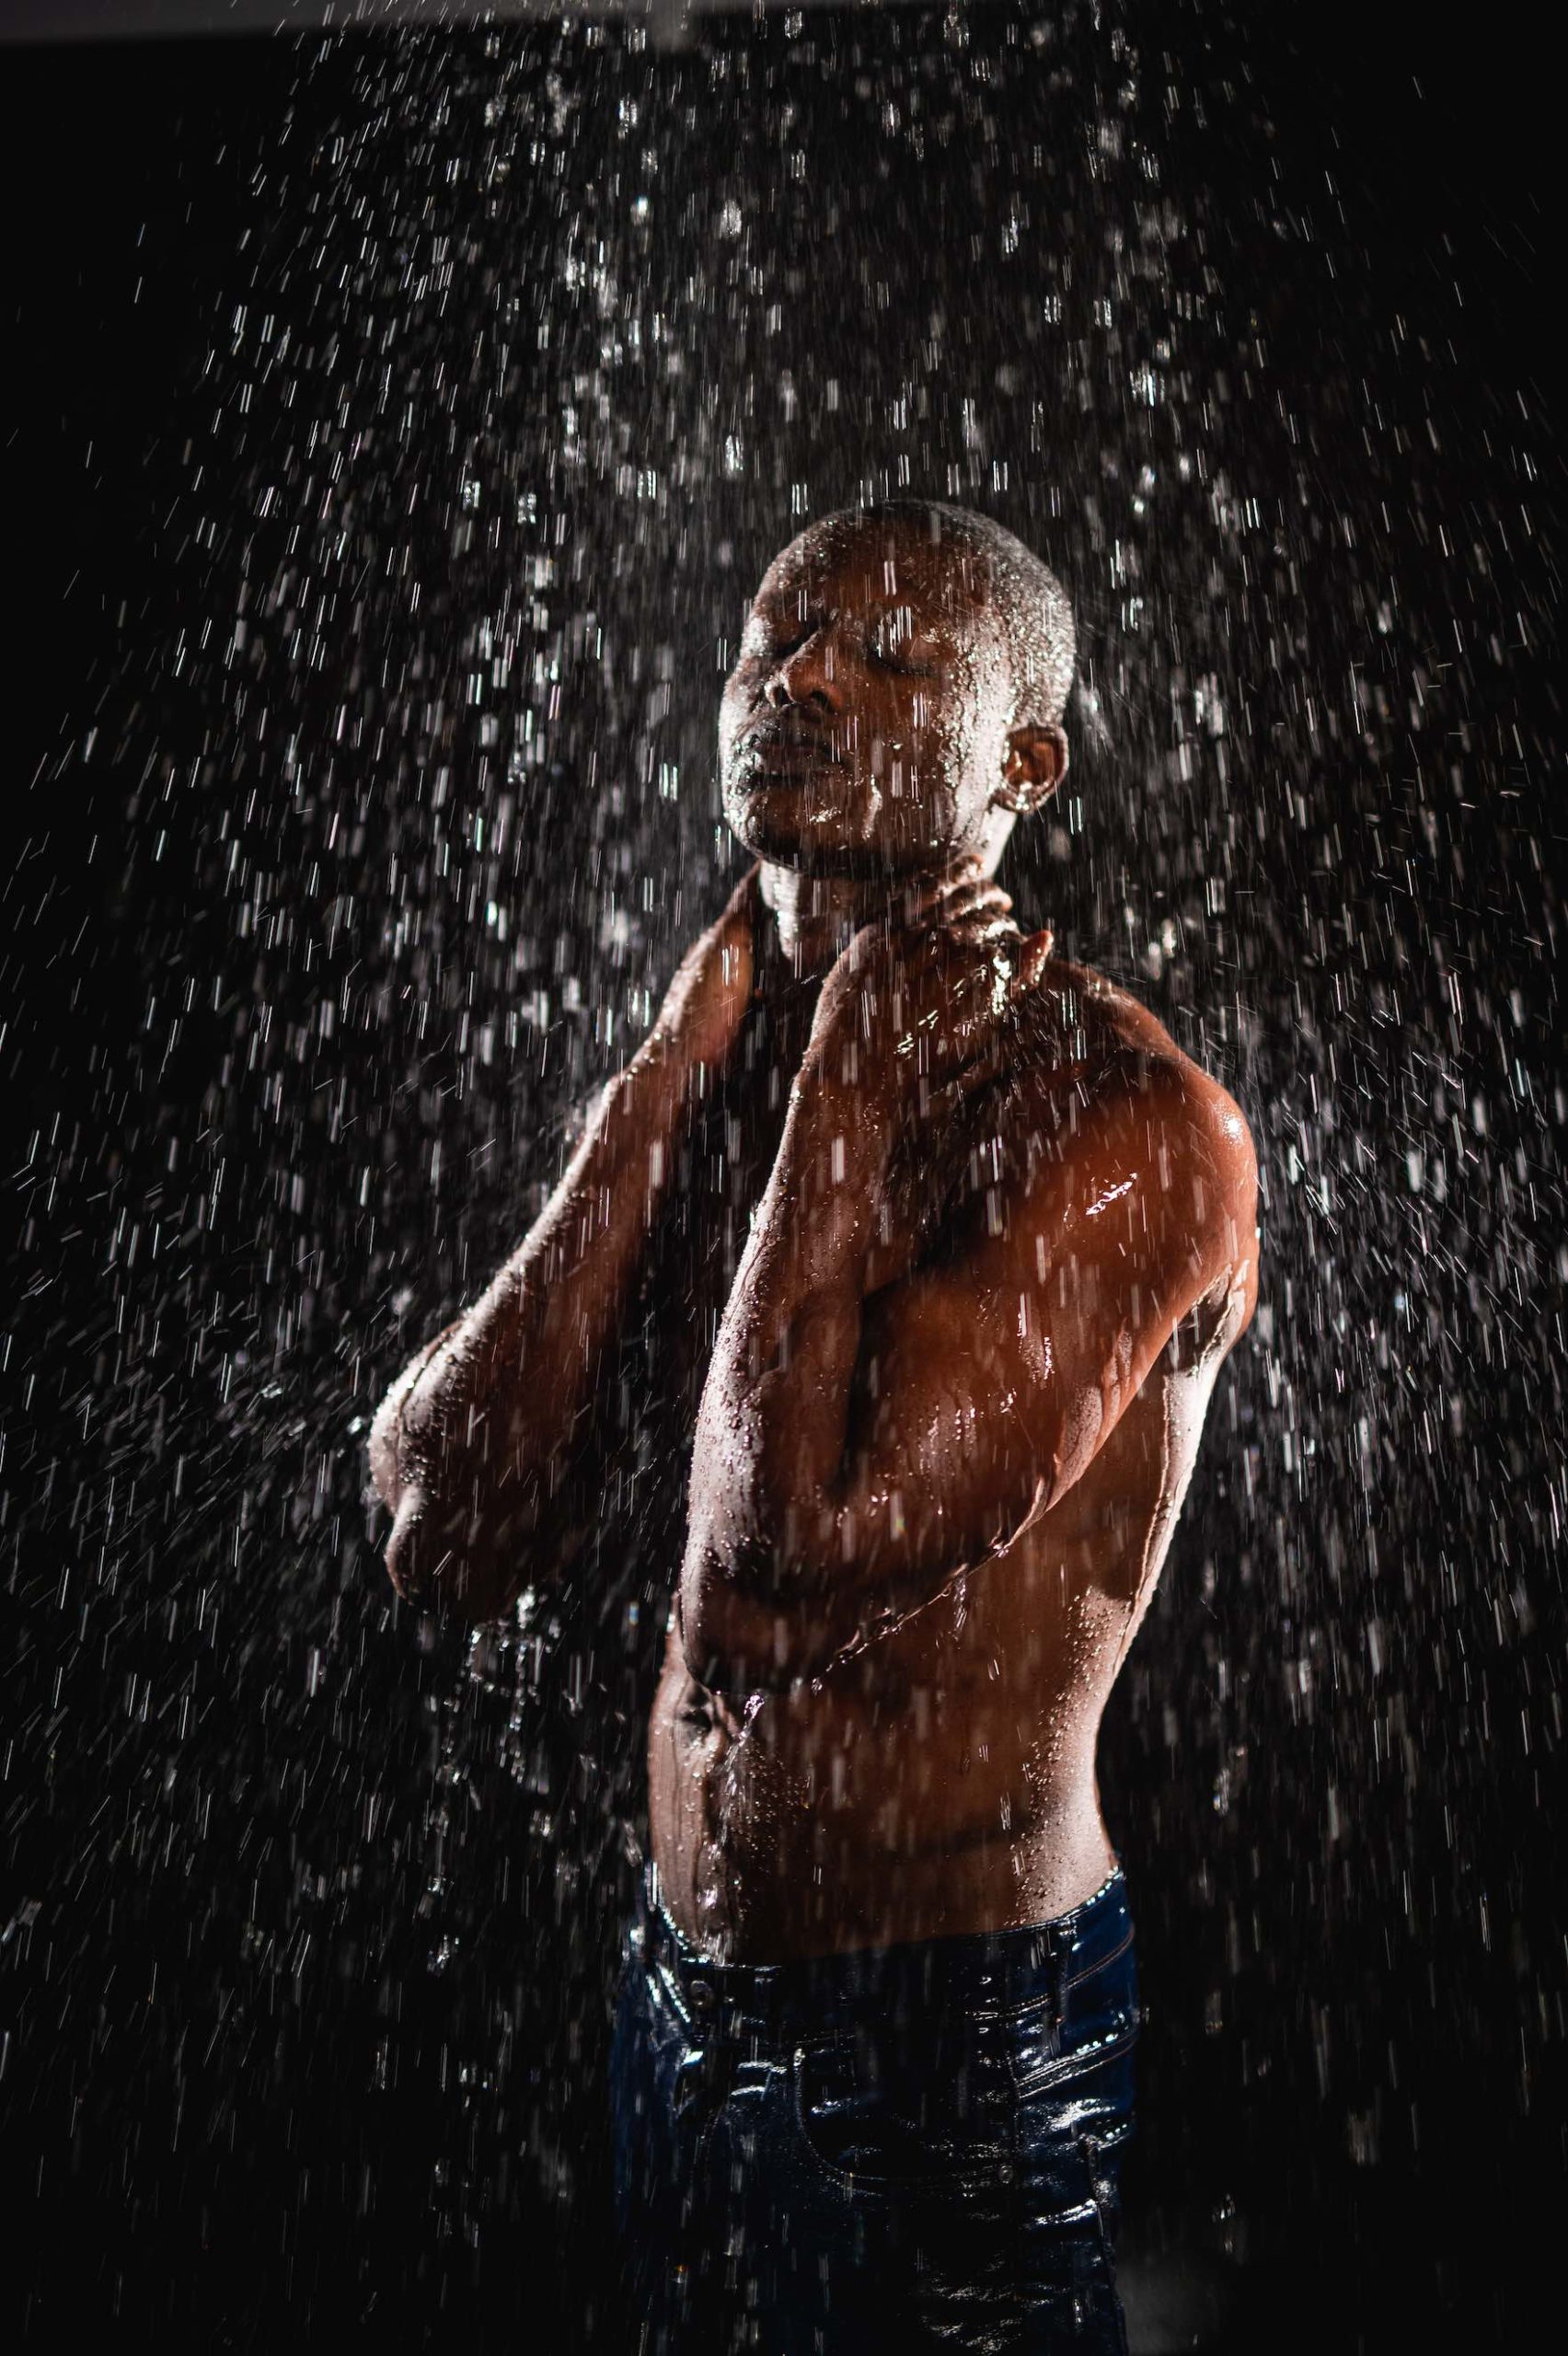 Crew Call Rain and Water Side profile of a man posing standing under a shower of water with eyes closed and soaked jeans